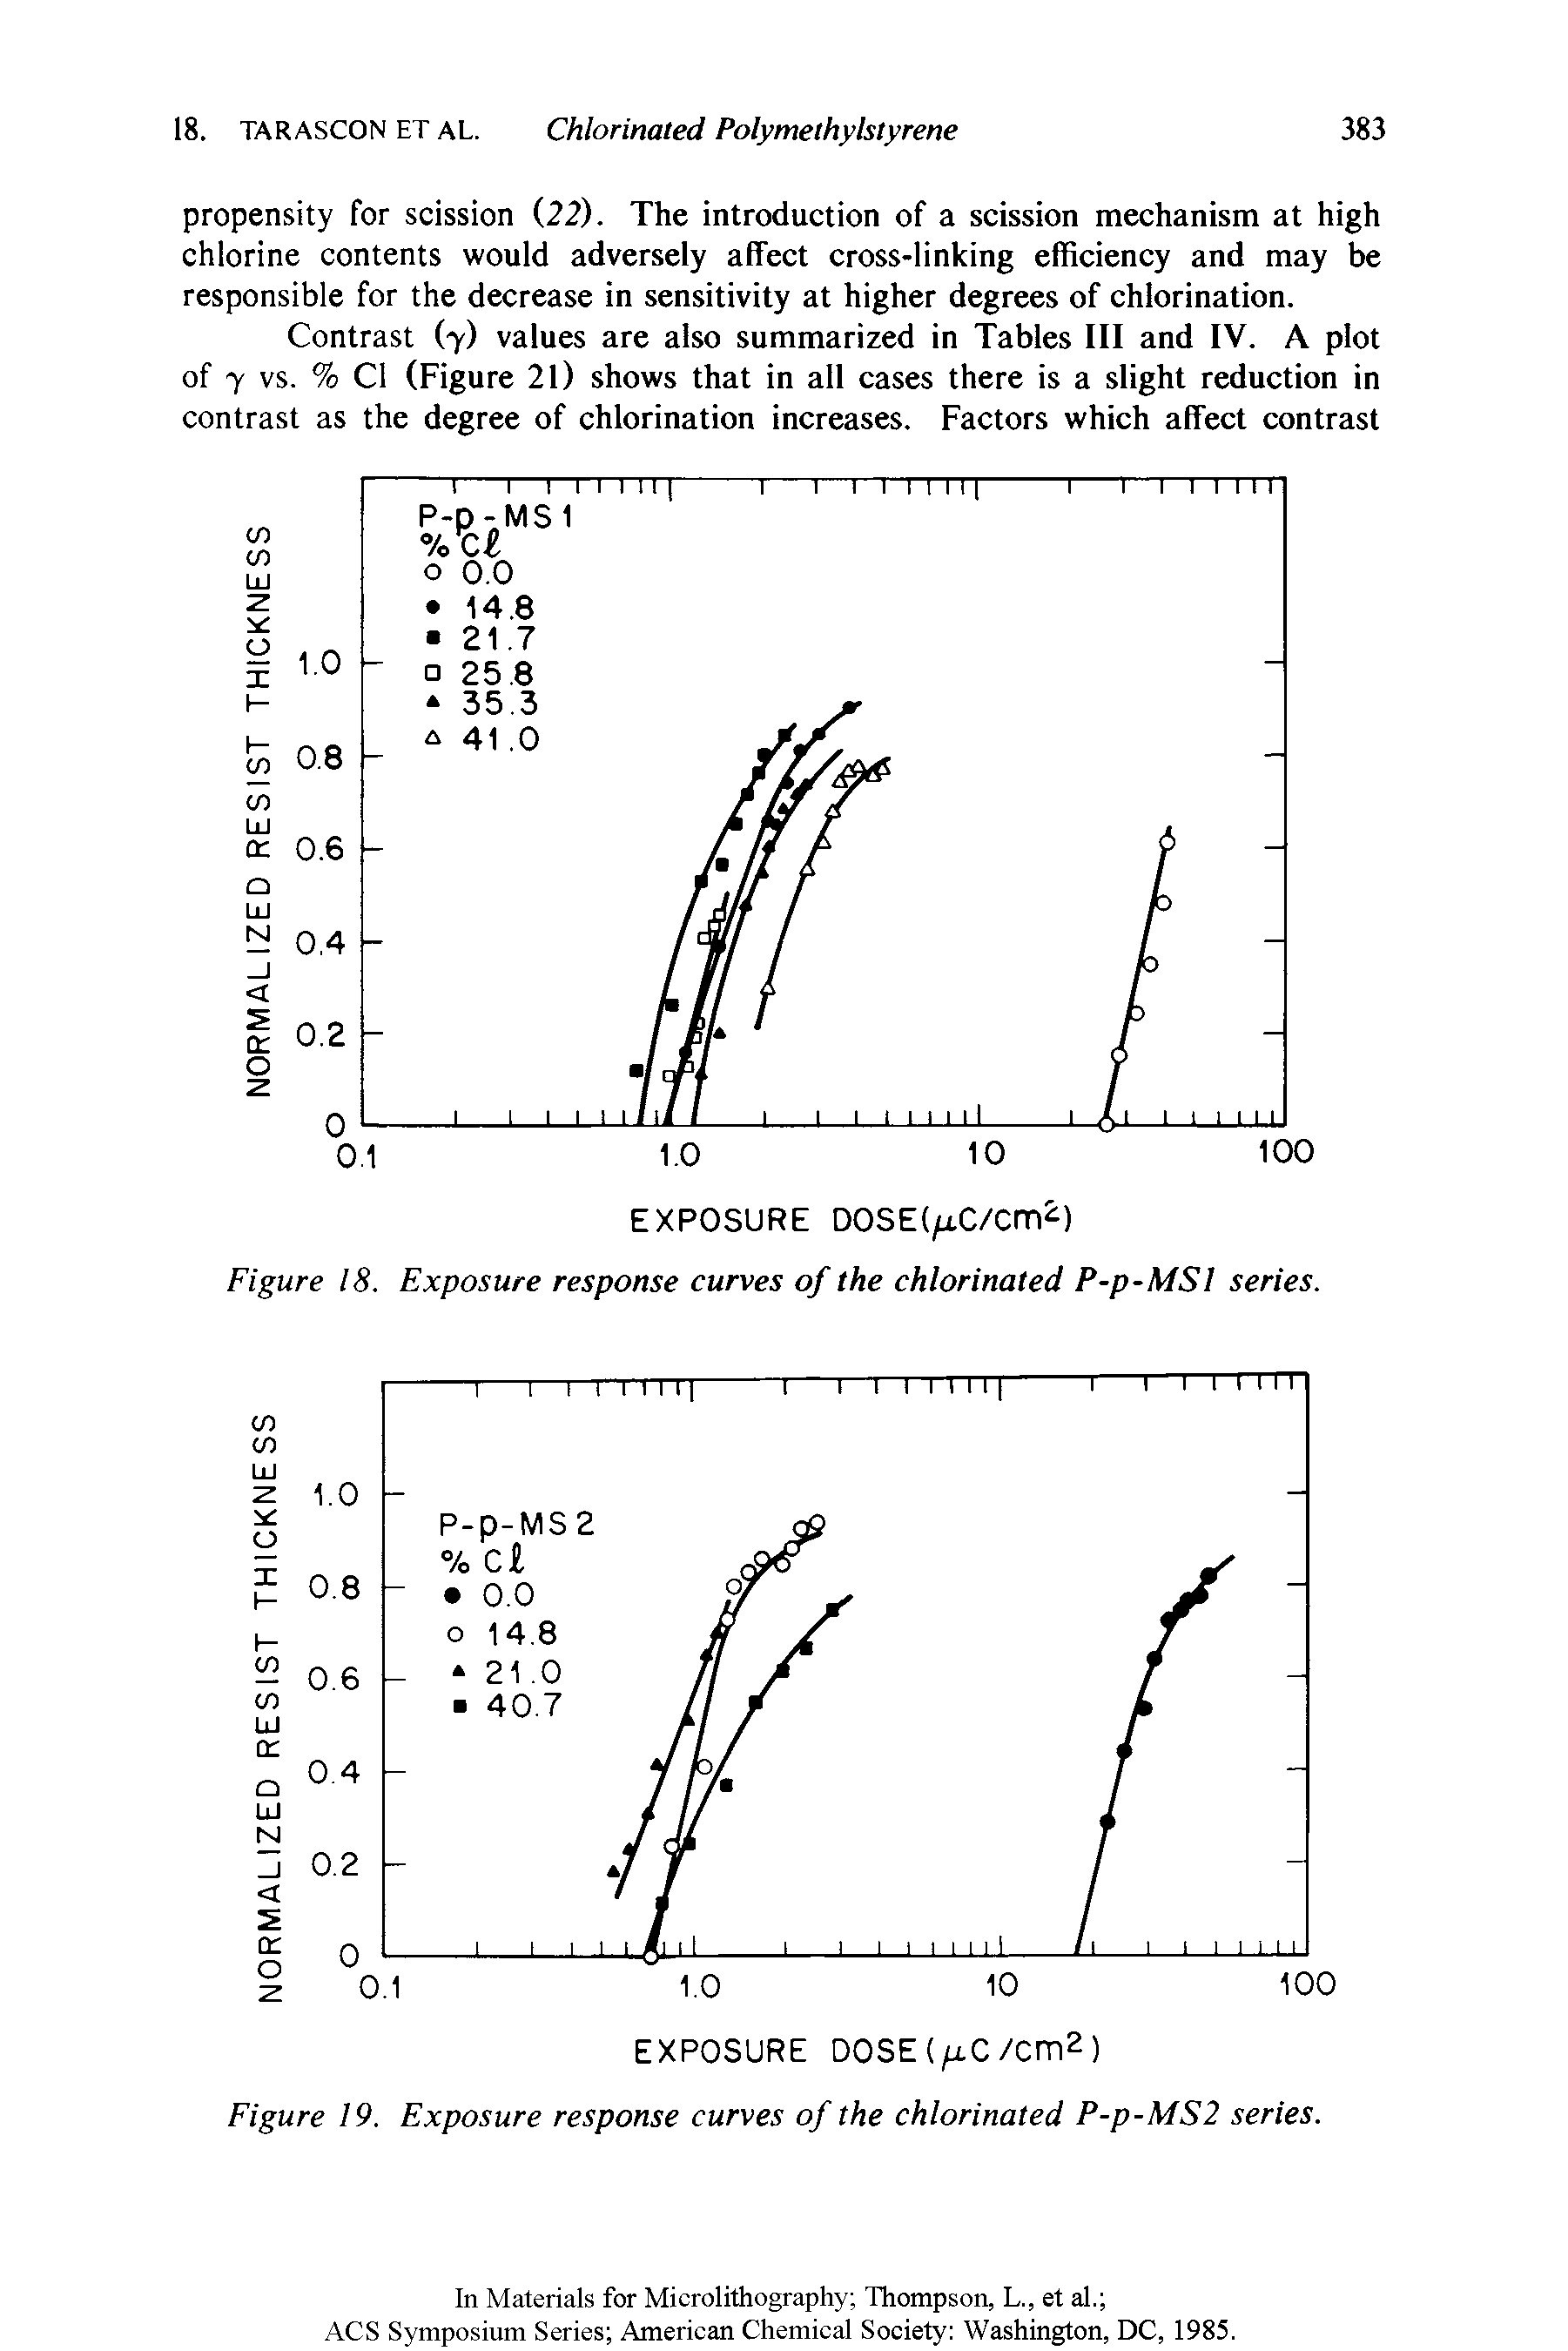 Figure 18. Exposure response curves of the chlorinated P-p-MSl series.